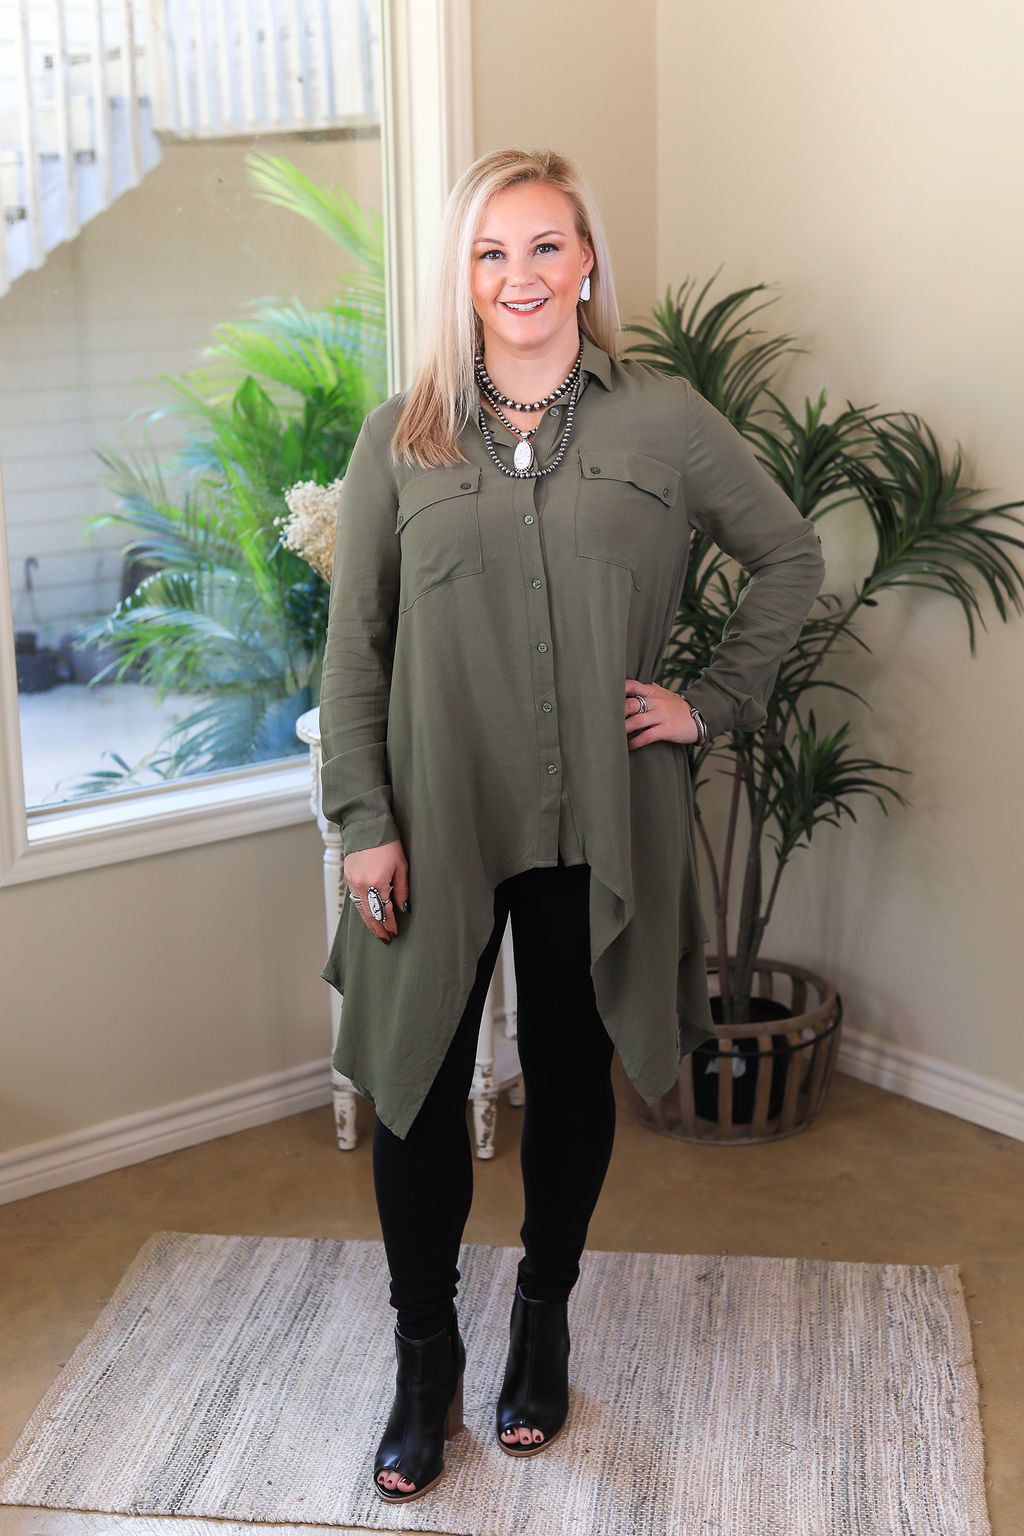 Last Chance Size S & M | Right Impression Linen Button Up Handkerchief Tunic in Olive Green - Giddy Up Glamour Boutique